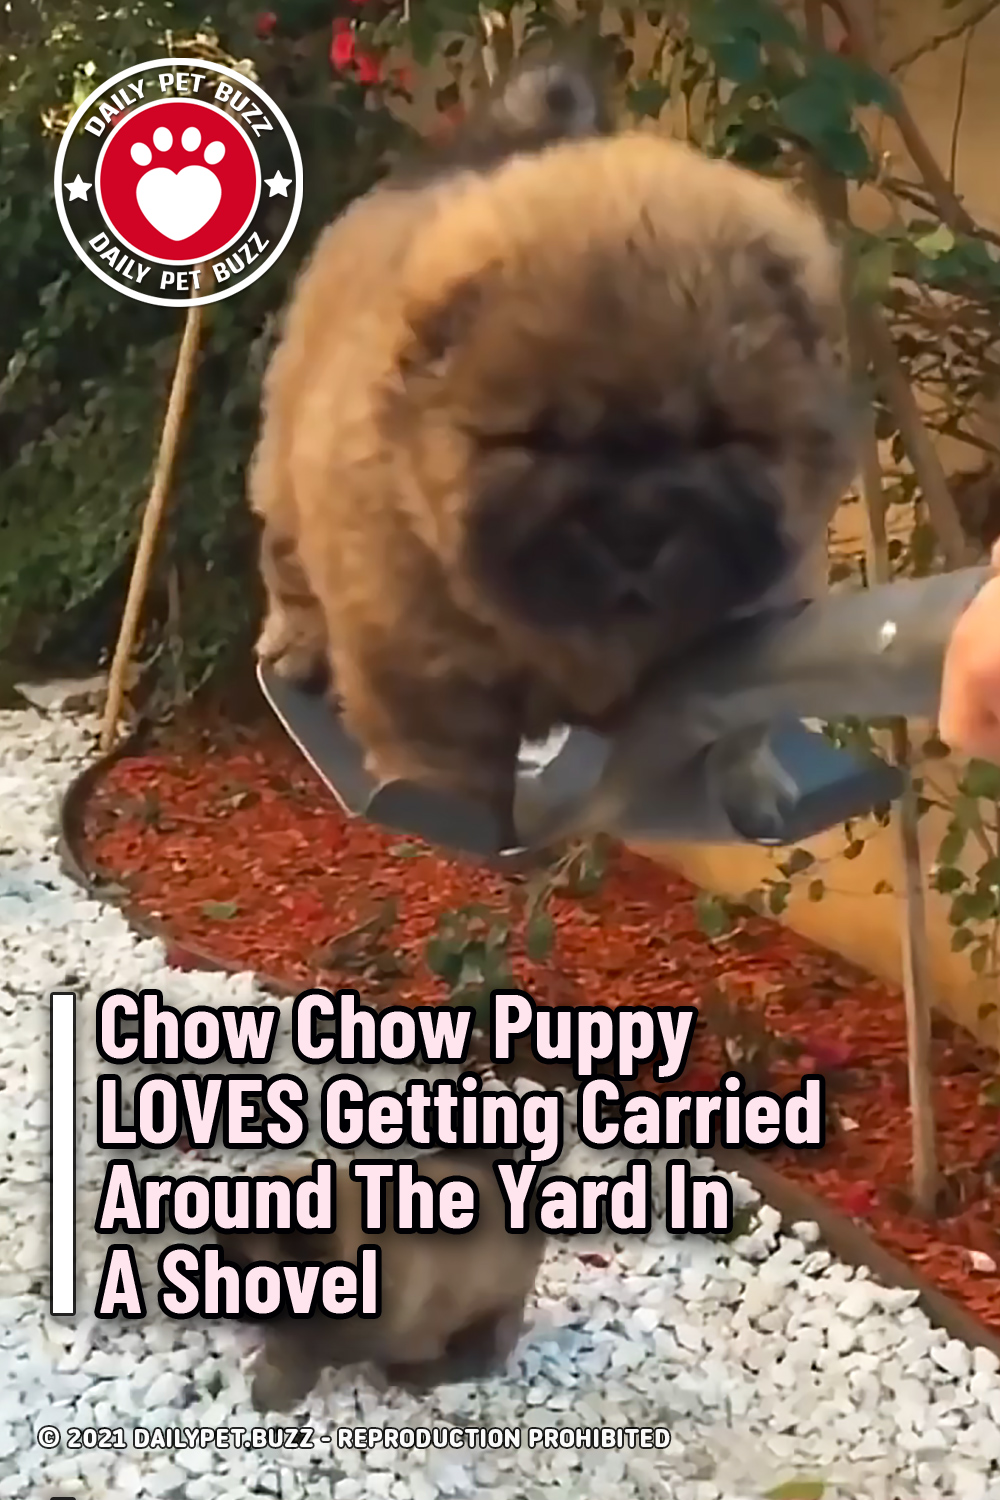 Chow Chow Puppy LOVES Getting Carried Around The Yard In A Shovel